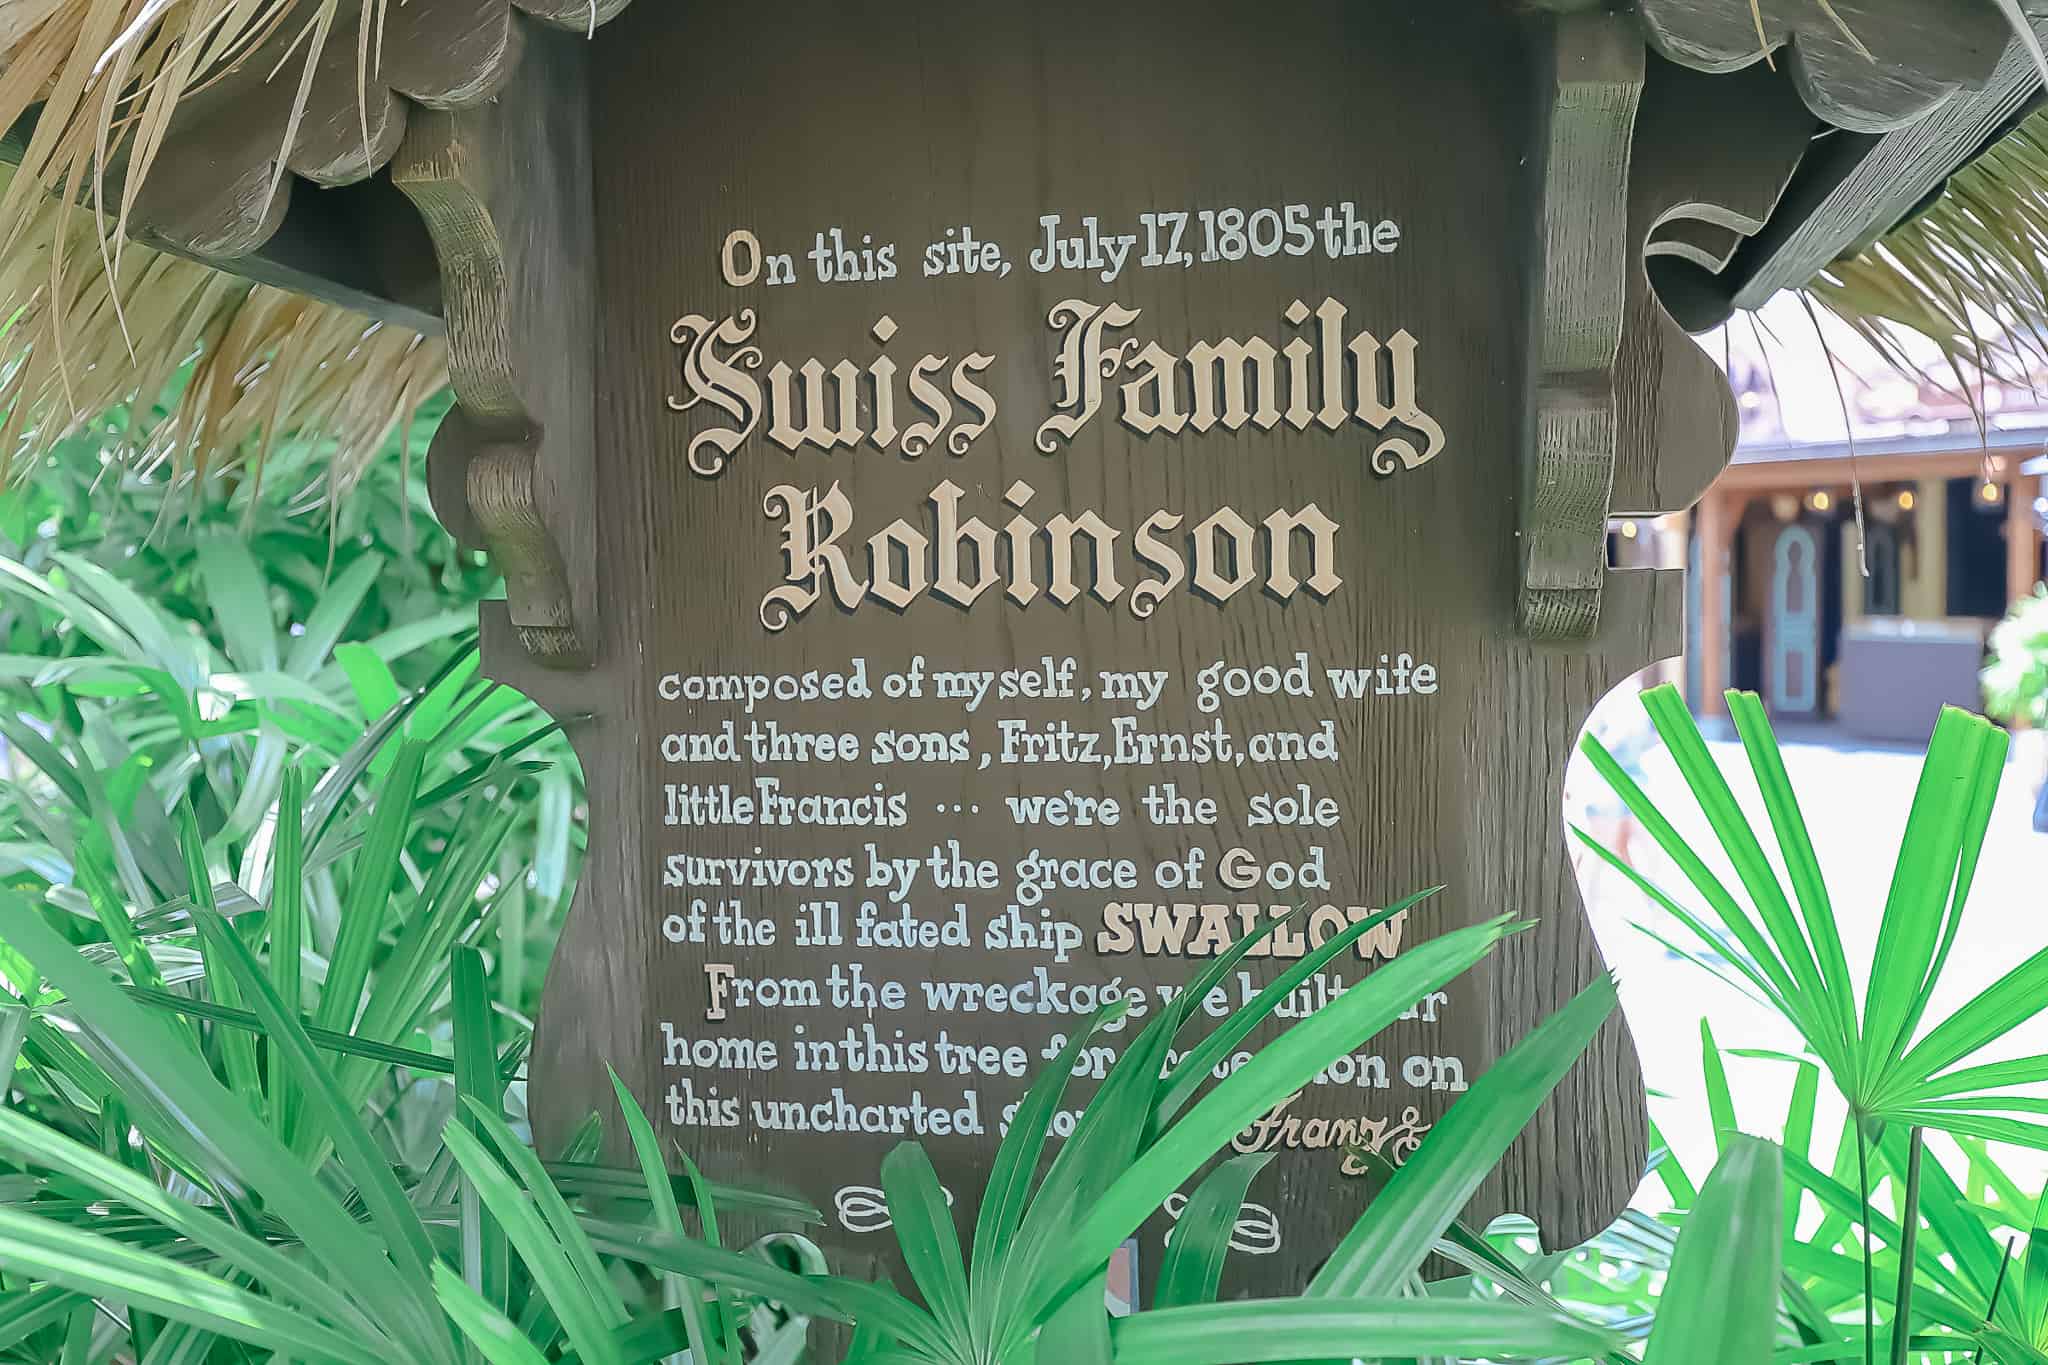 A sign that tells how the Swiss Family Robinson wrecked their ship. 